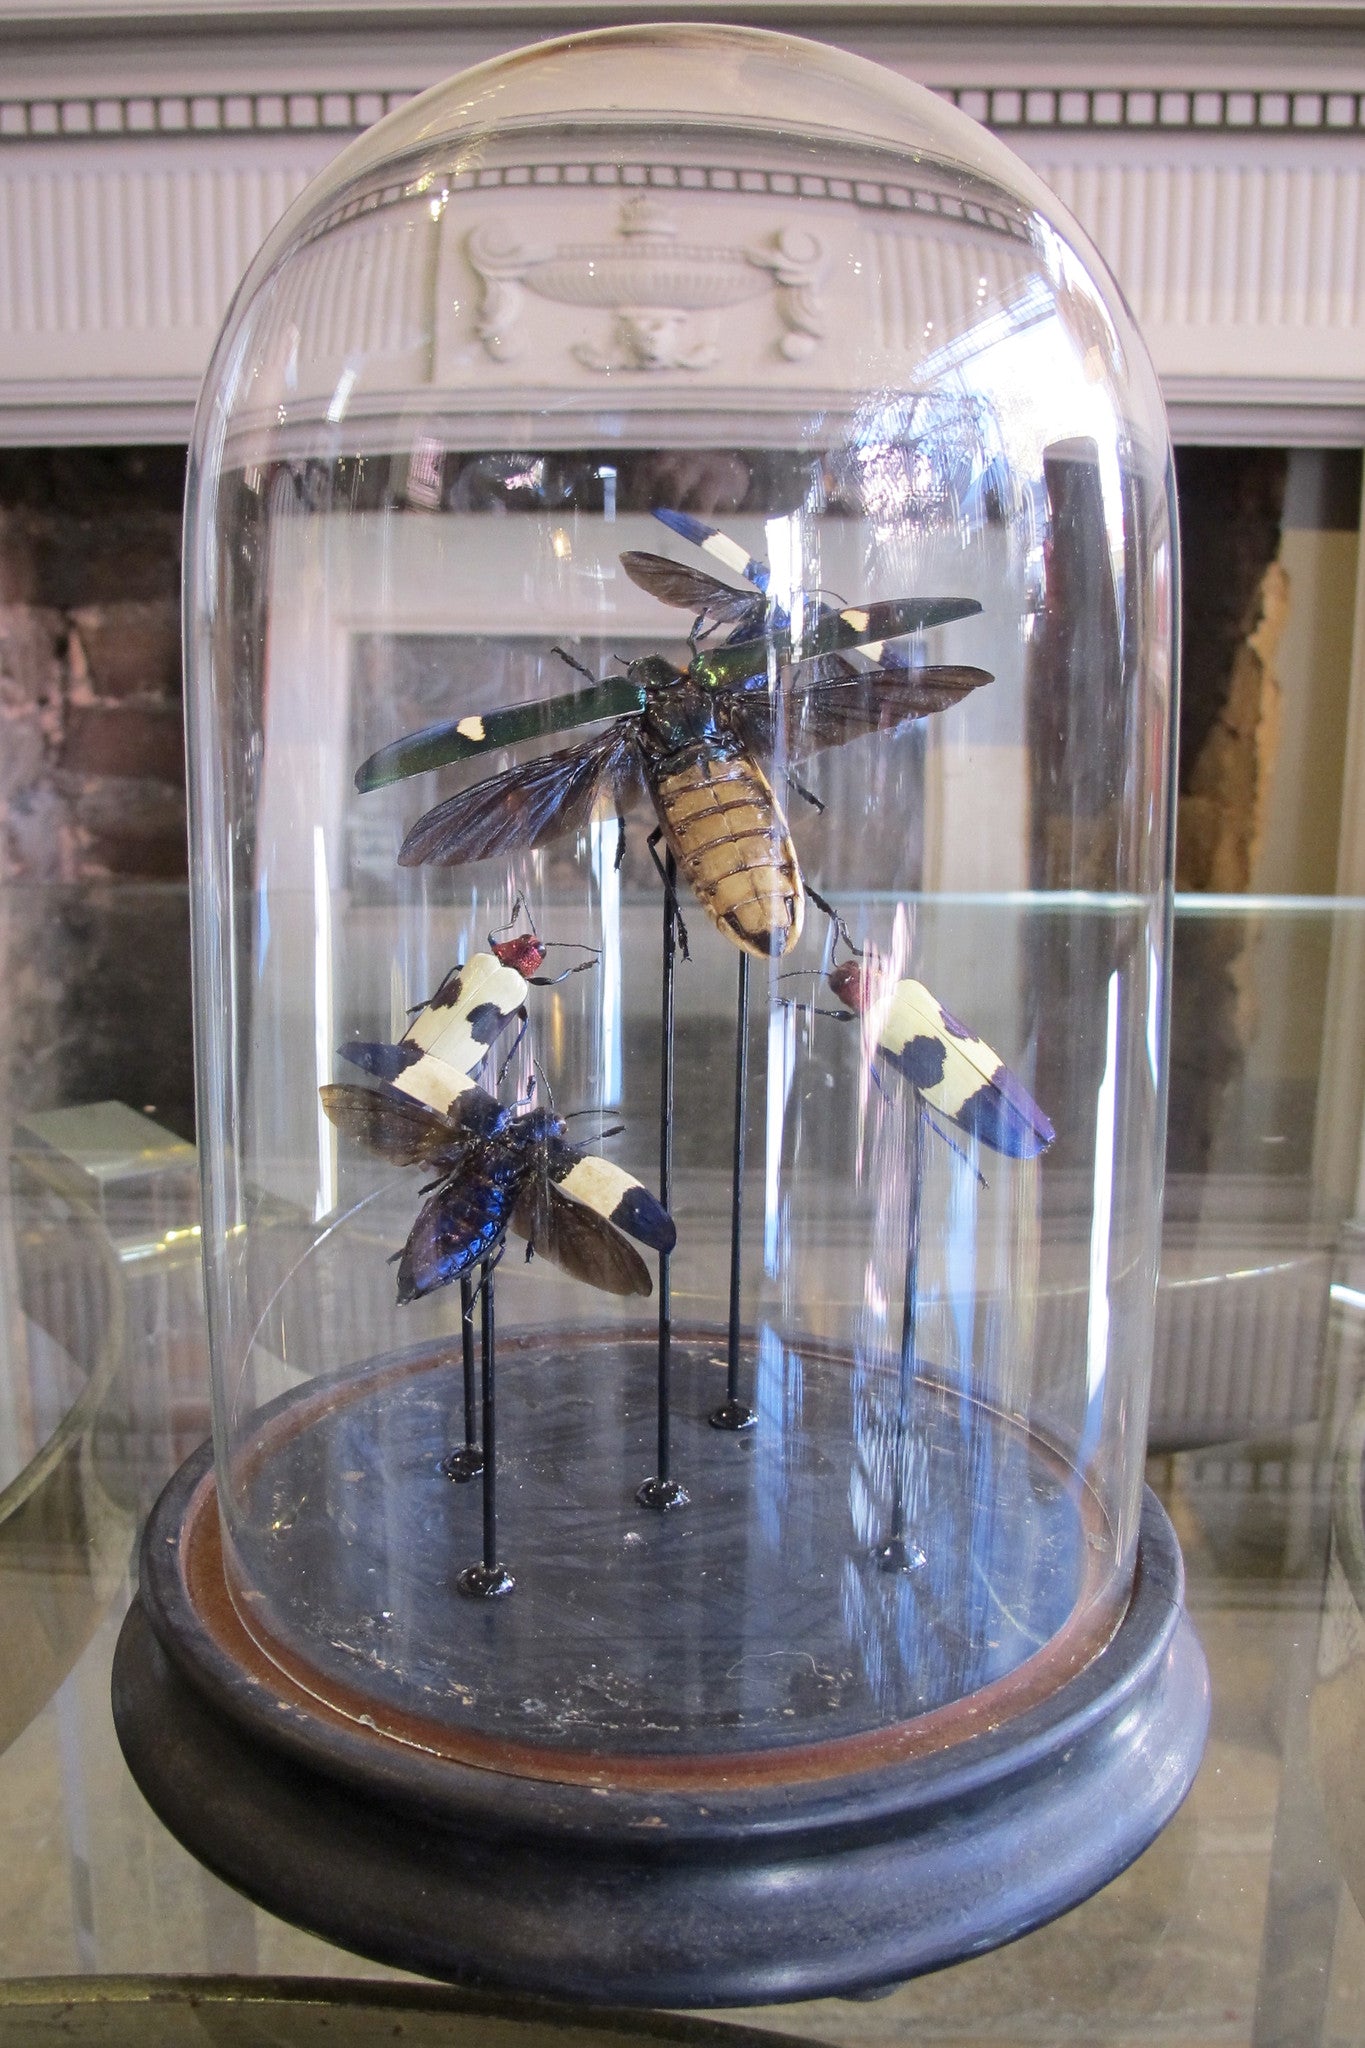 X Mounted Jewel Beetles in a Antique Bell Jar